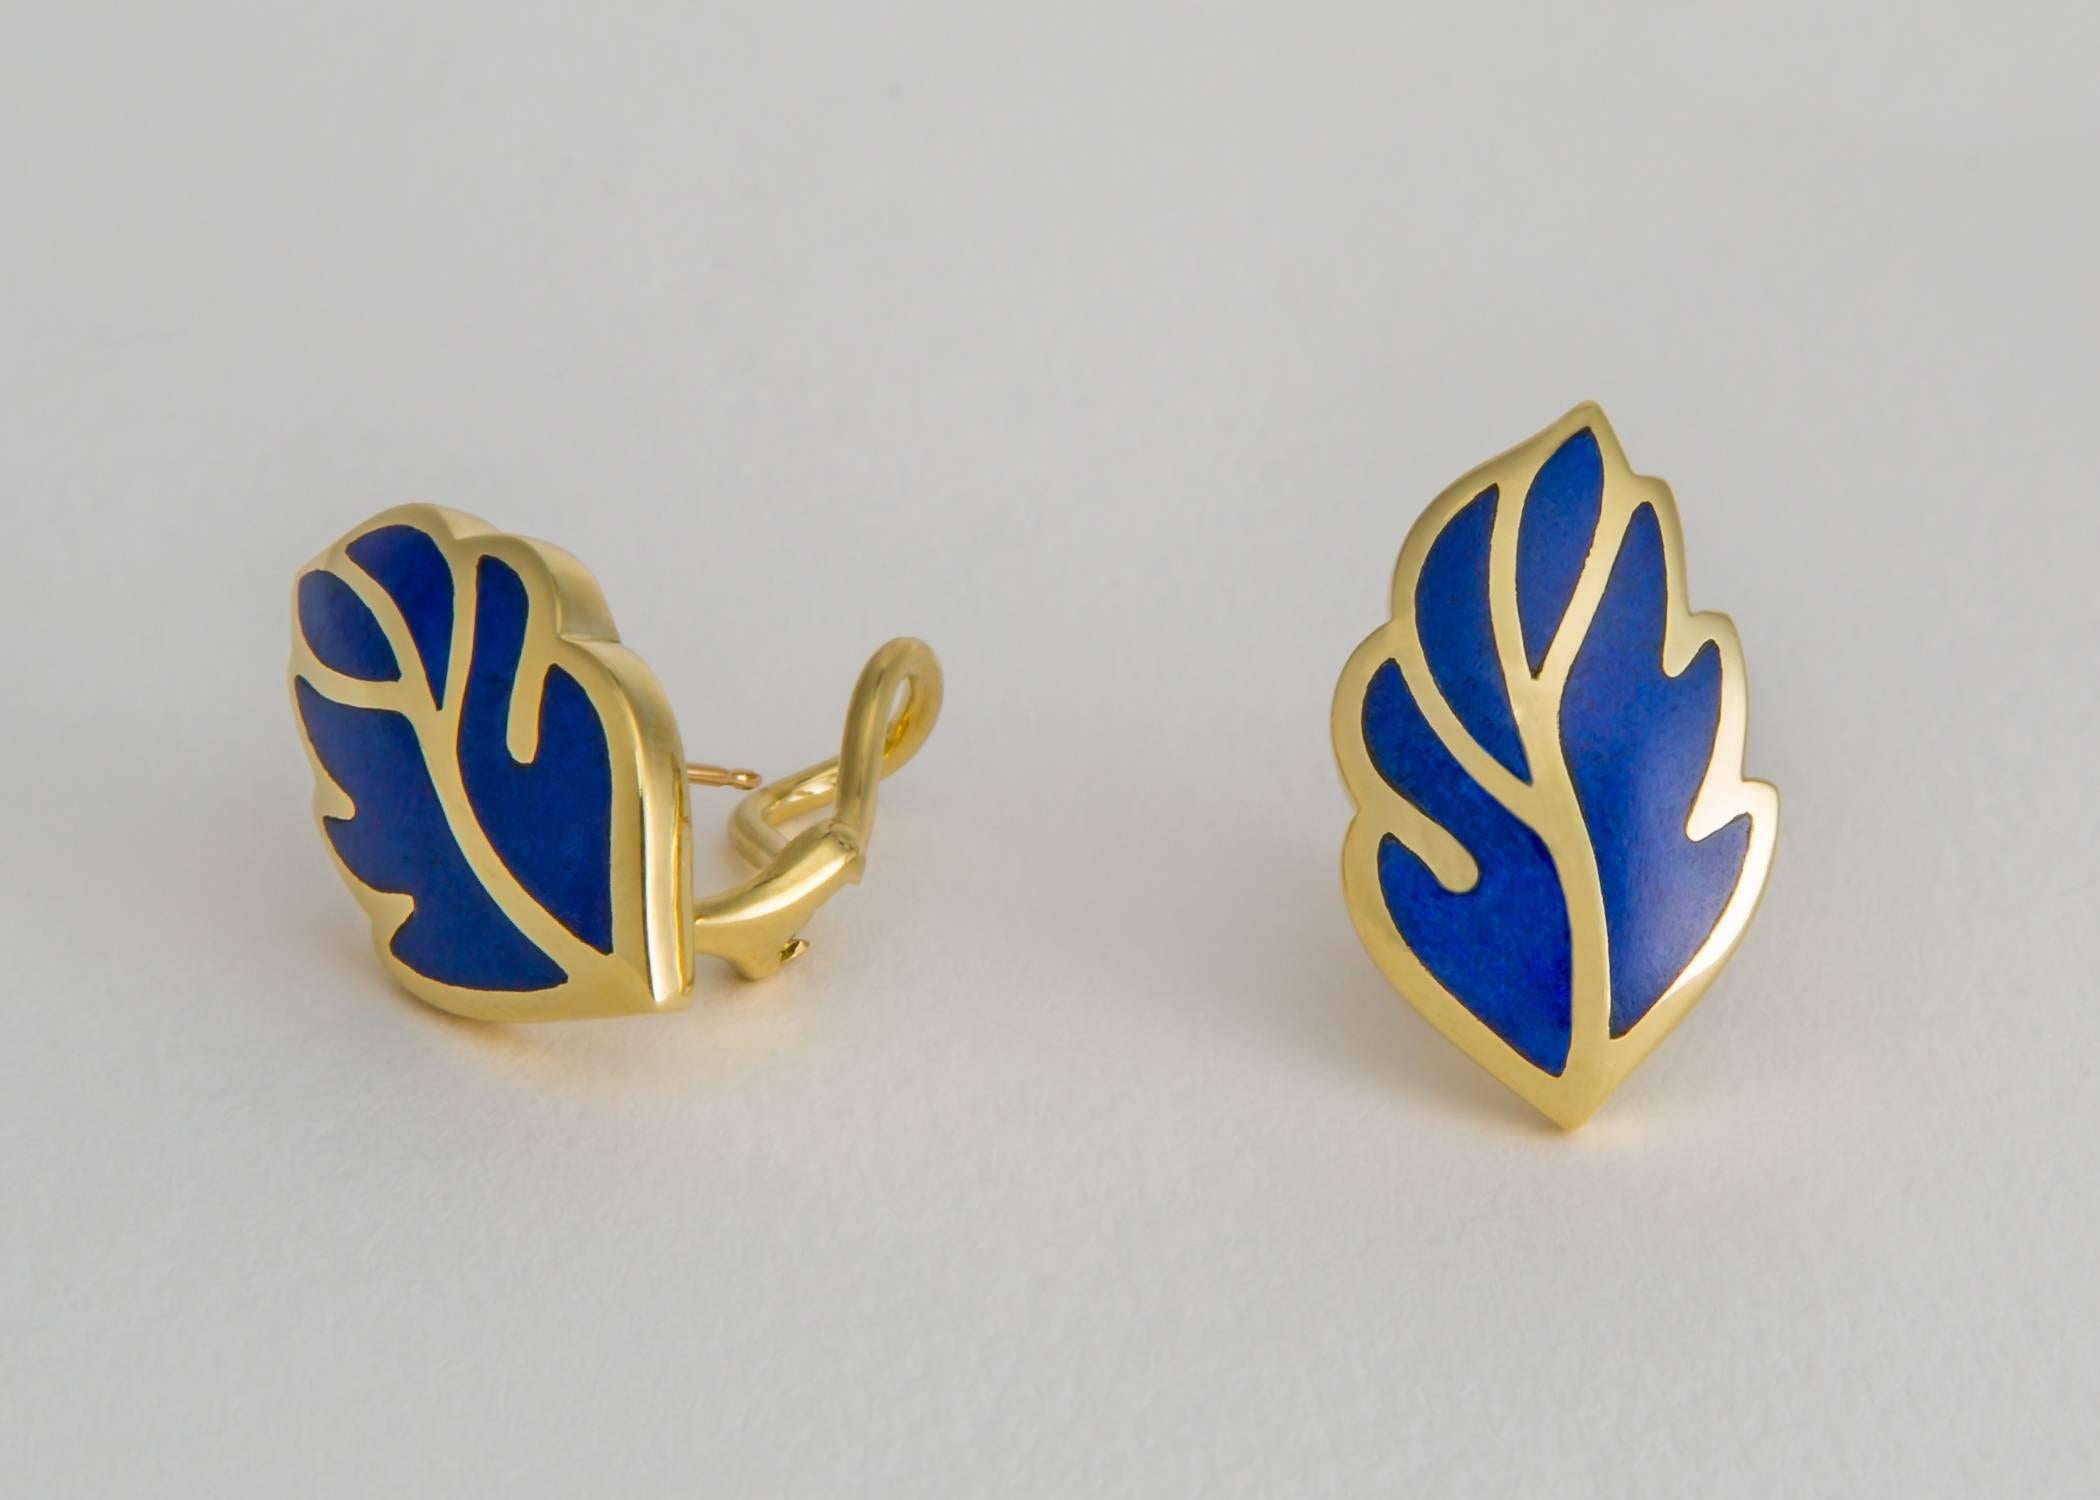 Rich lapis is inlayed in a soft easy to wear leaf shaped earring. Tiffany quality and design all the way. Approximately 1 inch in length.